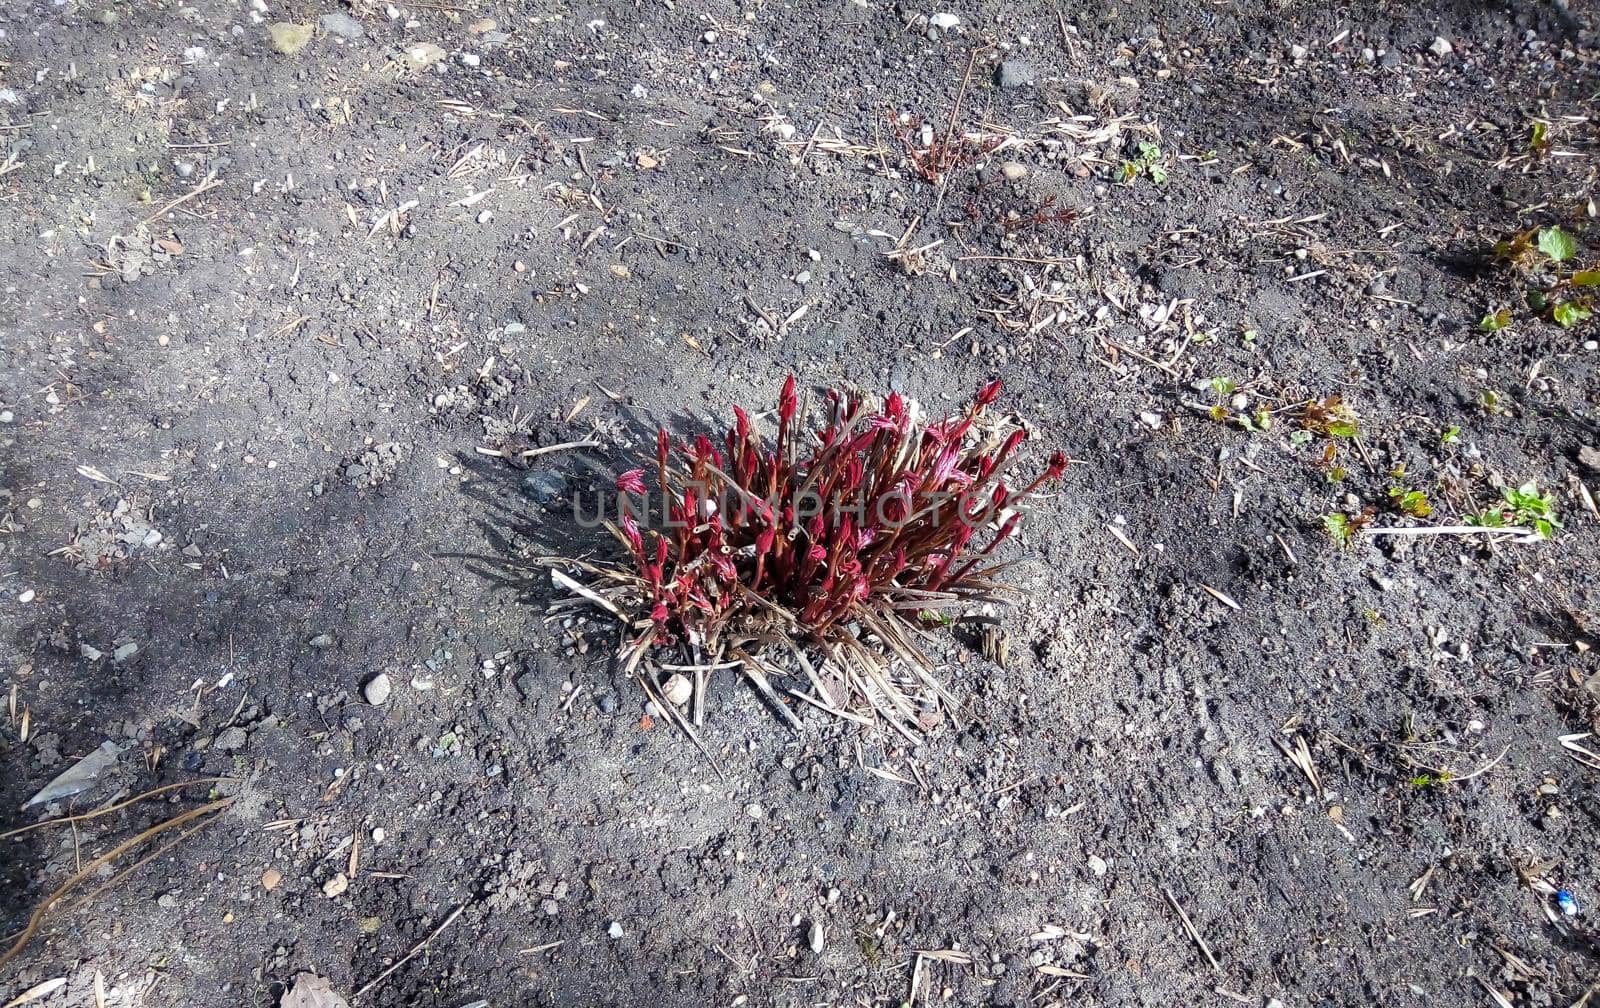 Peony sprouts emerged from the ground in the spring, red stems and leaves.